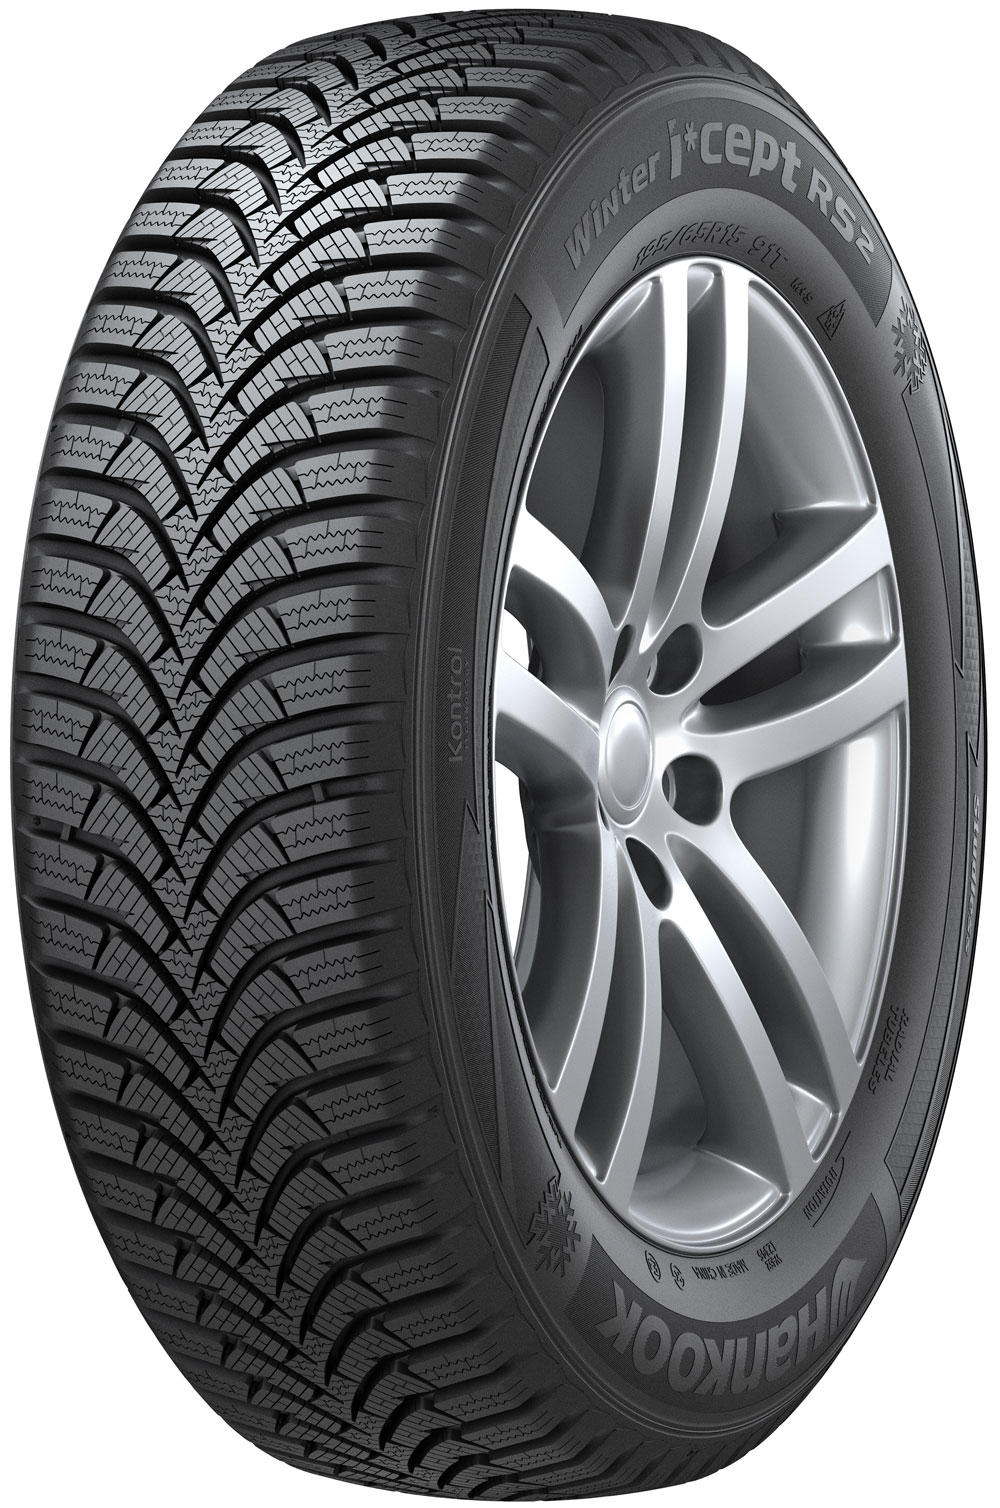 Anvelope auto HANKOOK W452 Winter icept RS2 BMW 195/50 R15 82T